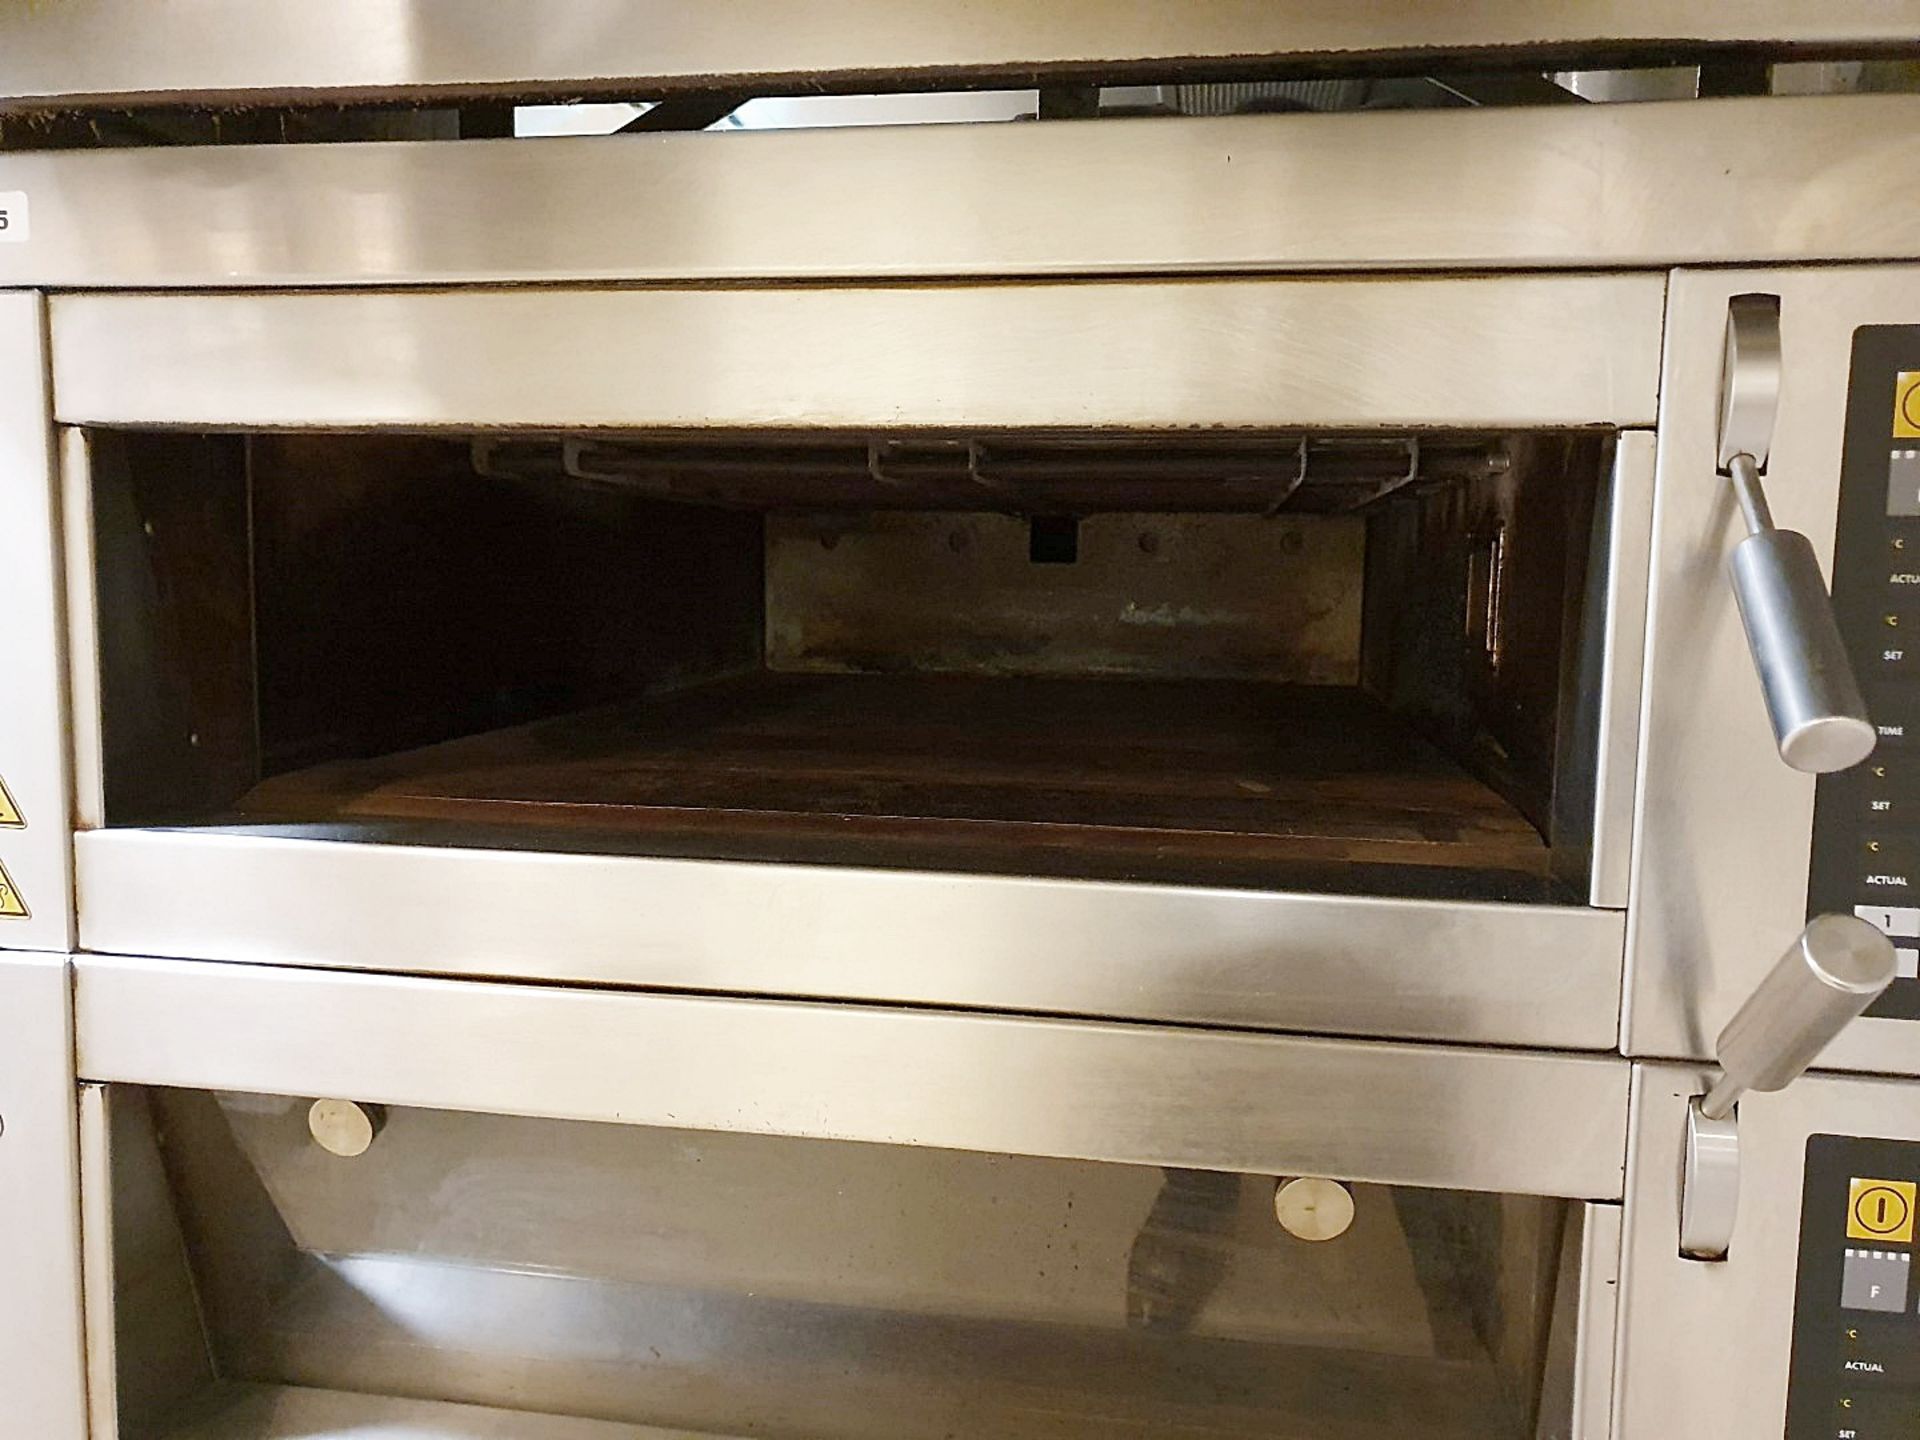 1 x Instoreoven Miwe Condo Heated Deck Bakery Oven With Four Chambers, Drop Down Prep Conveyor and - Image 20 of 35